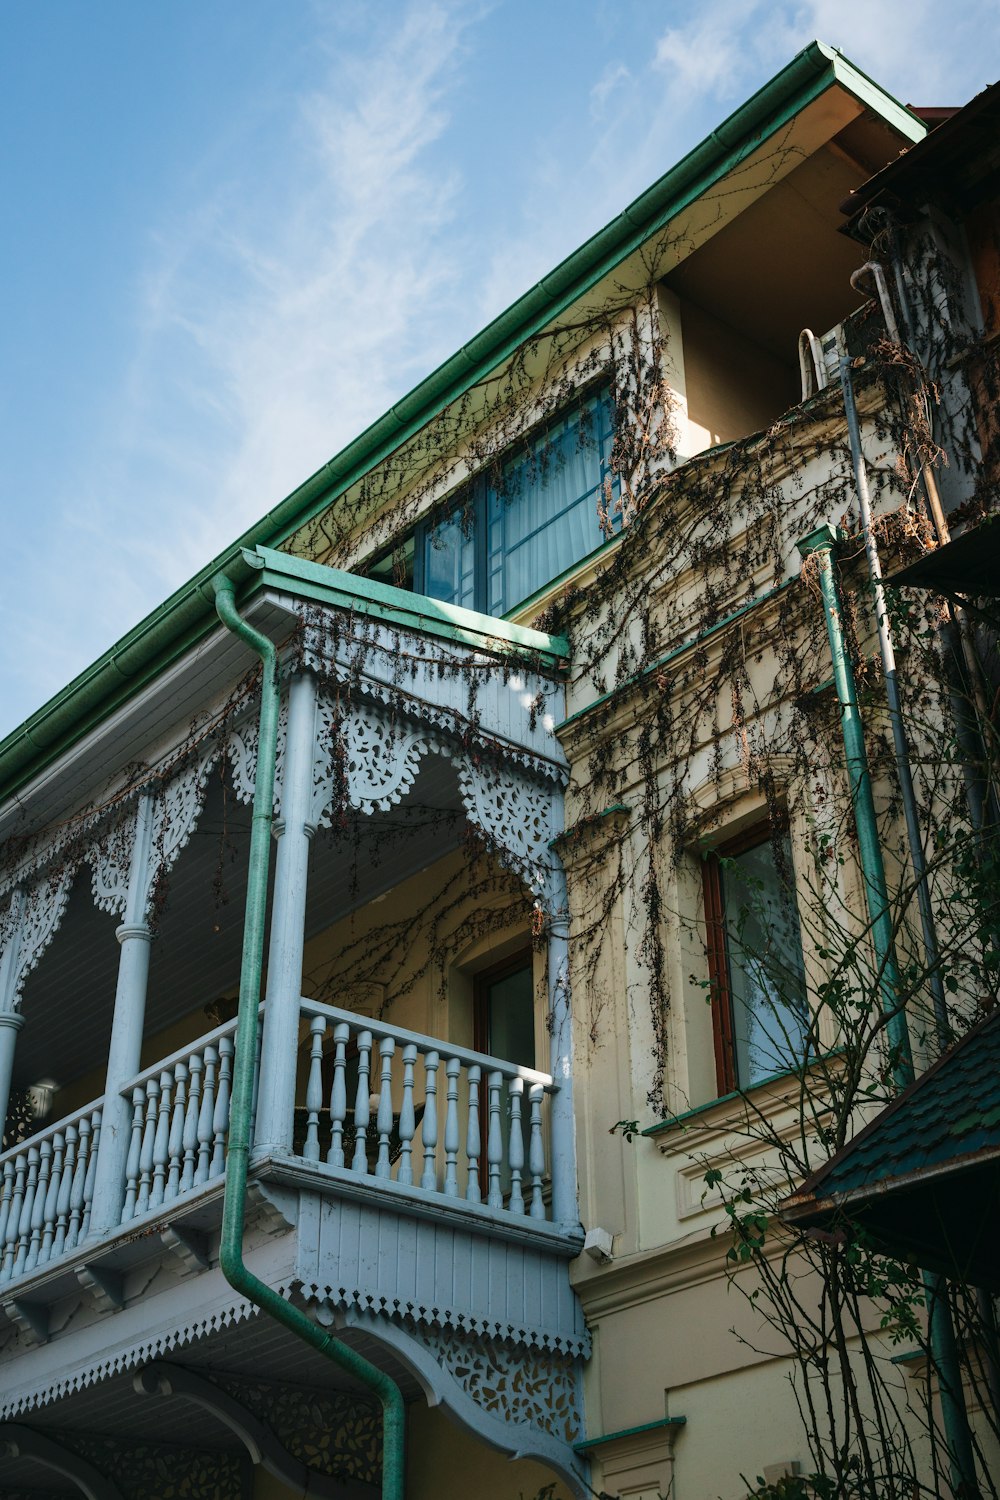 a balcony and balconies of an old building